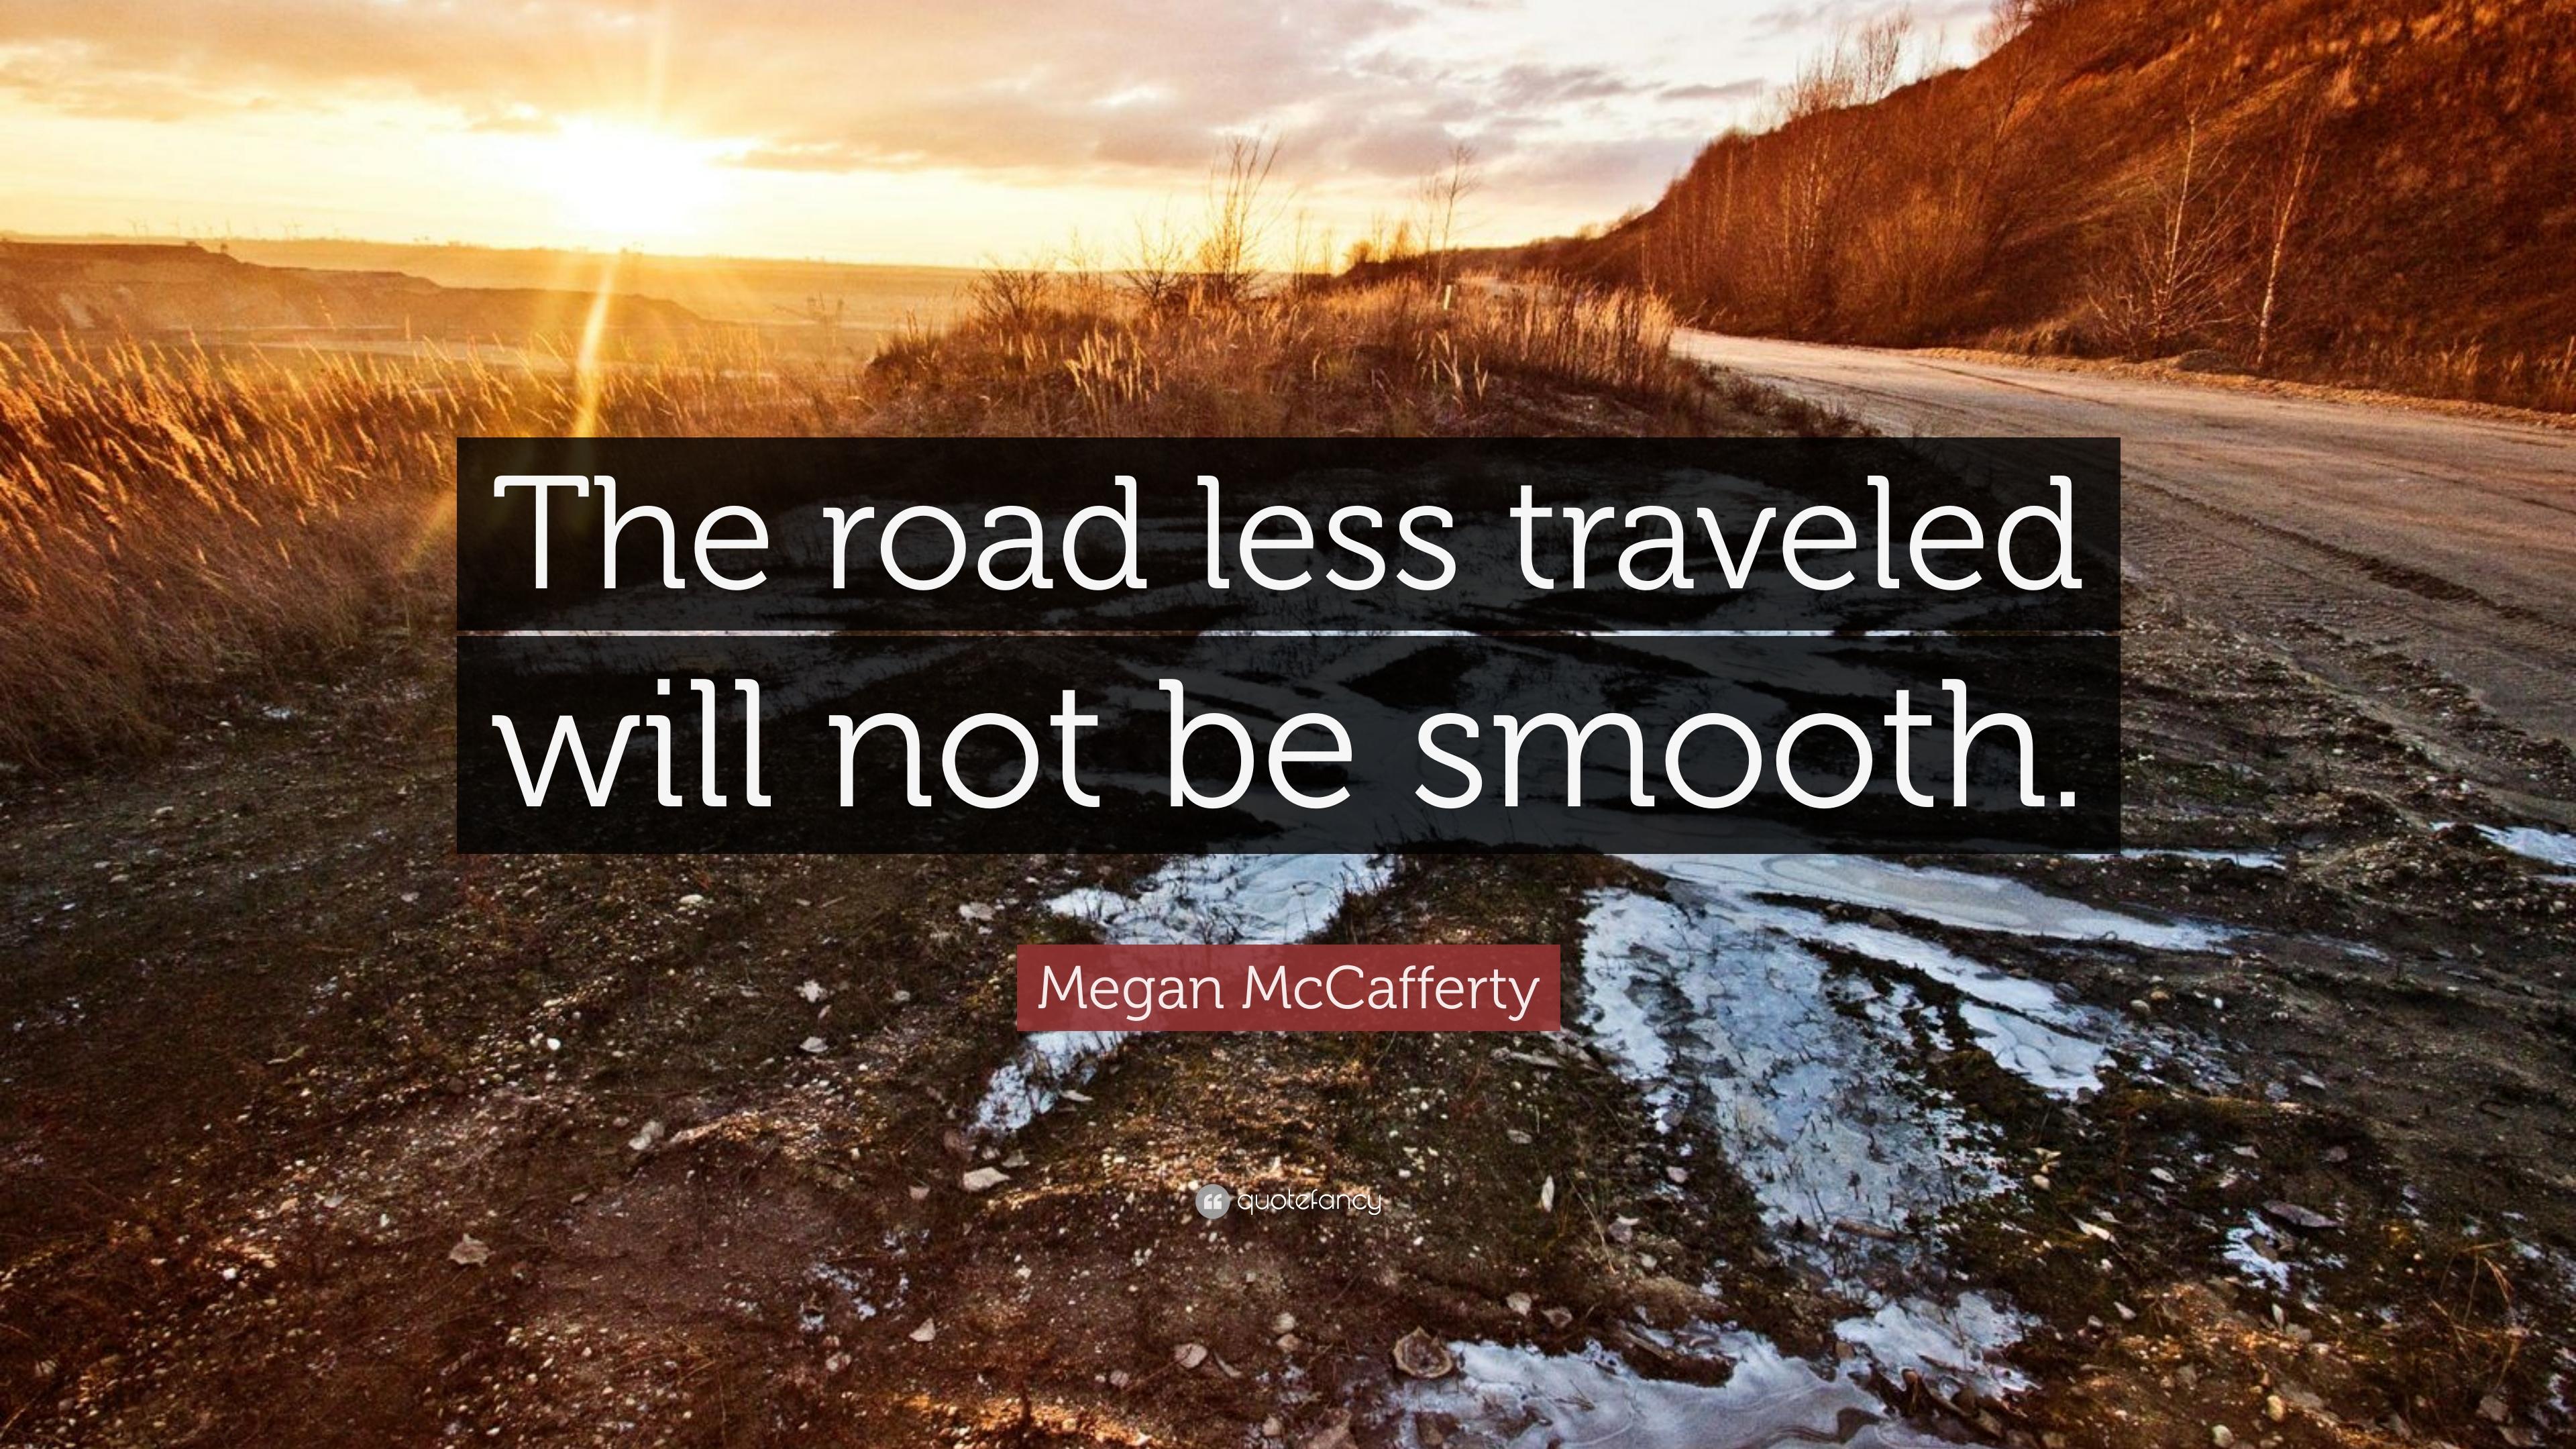 Megan McCafferty Quote: “The road less traveled will not be smooth